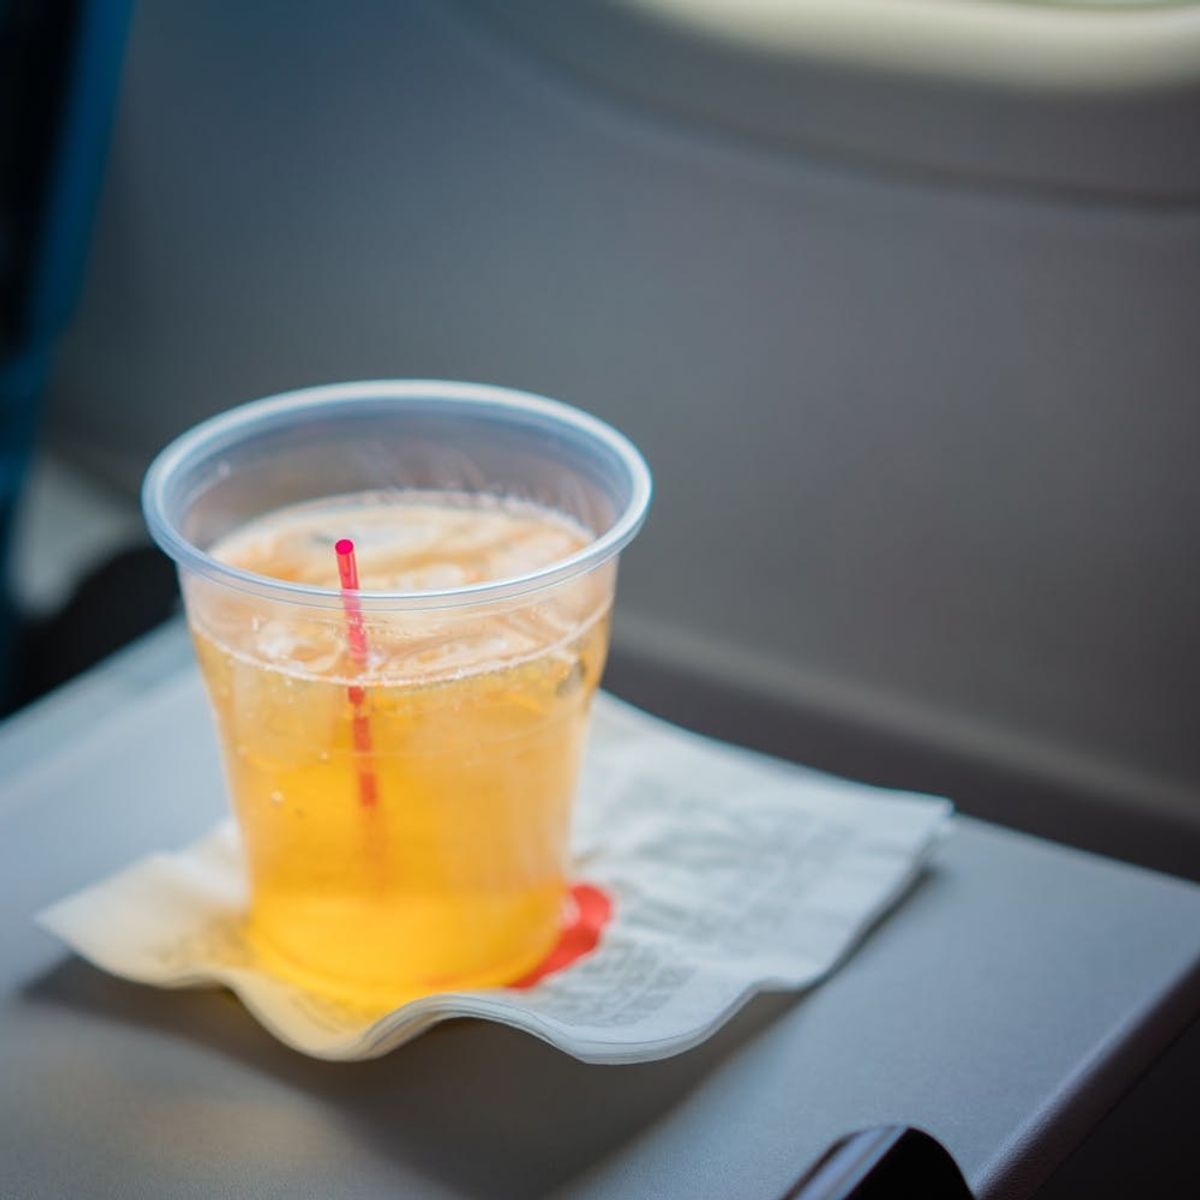 14 Airlines Where You Can Expect Free Booze